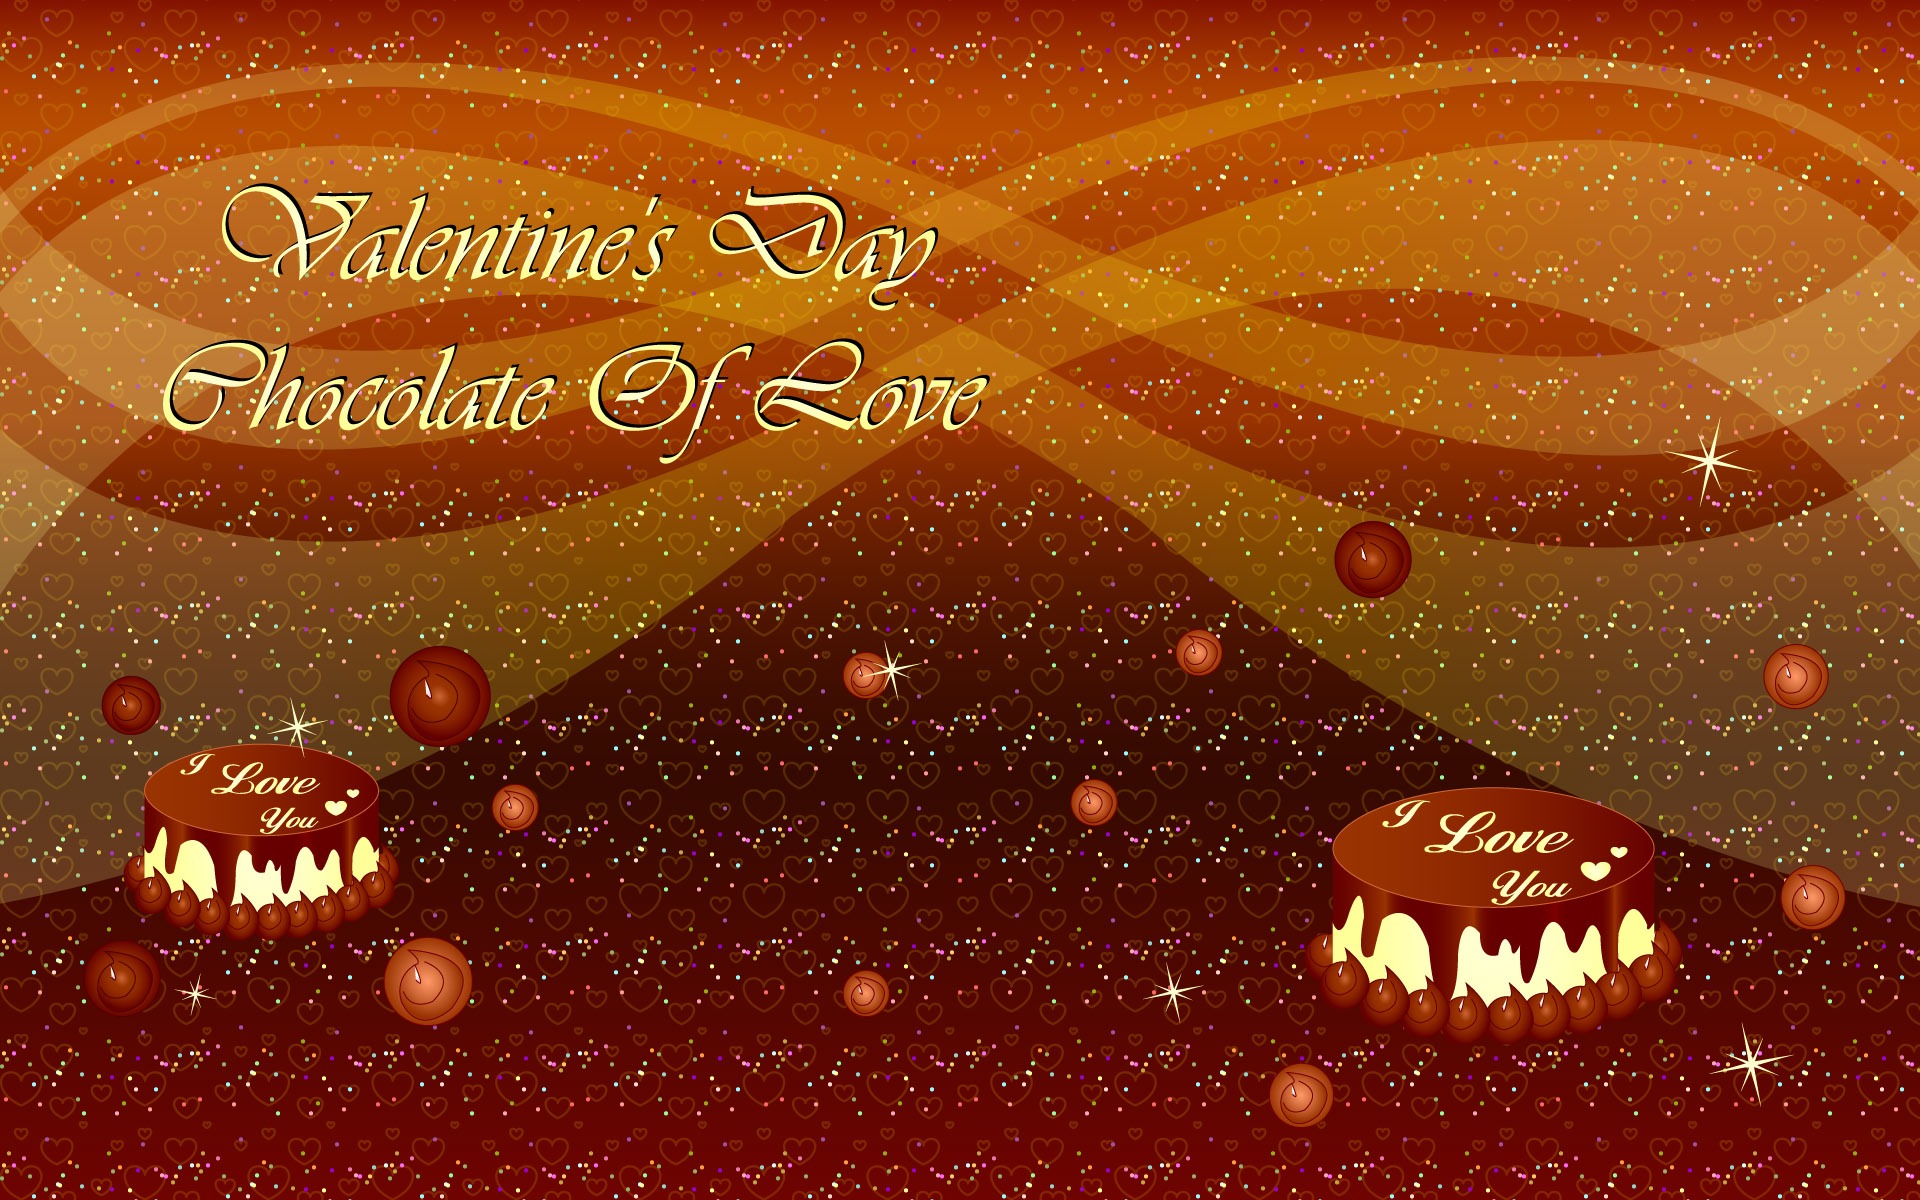 Valentine's Day Theme Wallpapers (2) #4 - 1920x1200